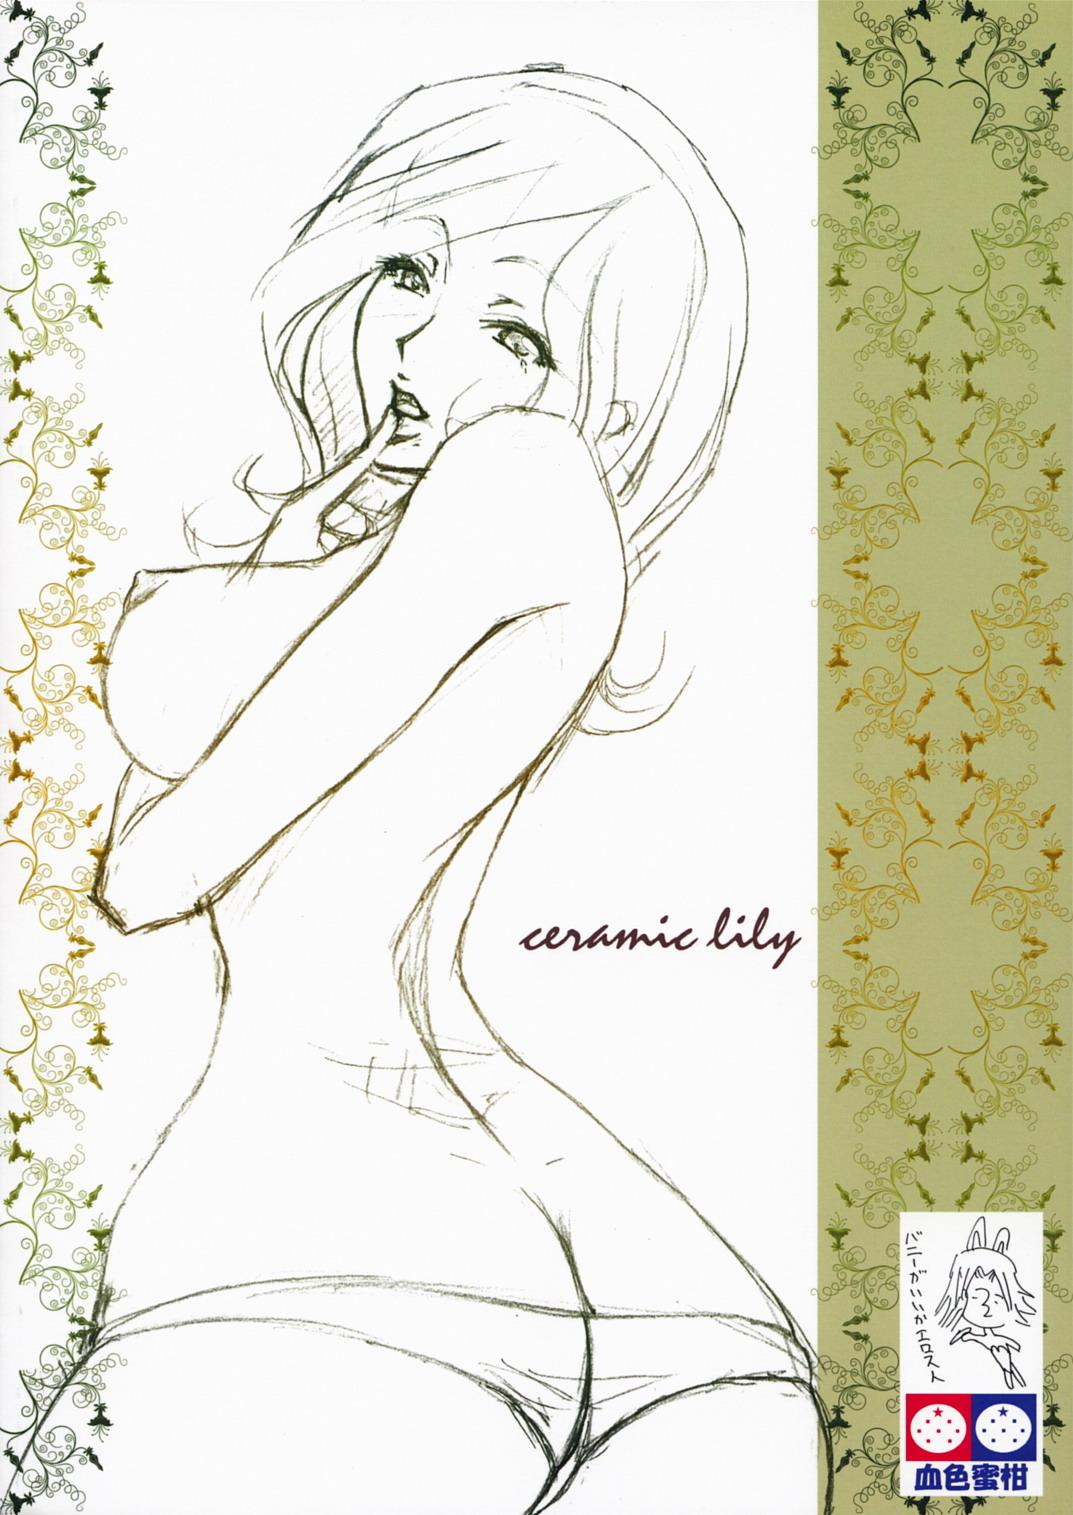 Girlfriends CERAMIC LILY - Code geass Cheating - Page 34